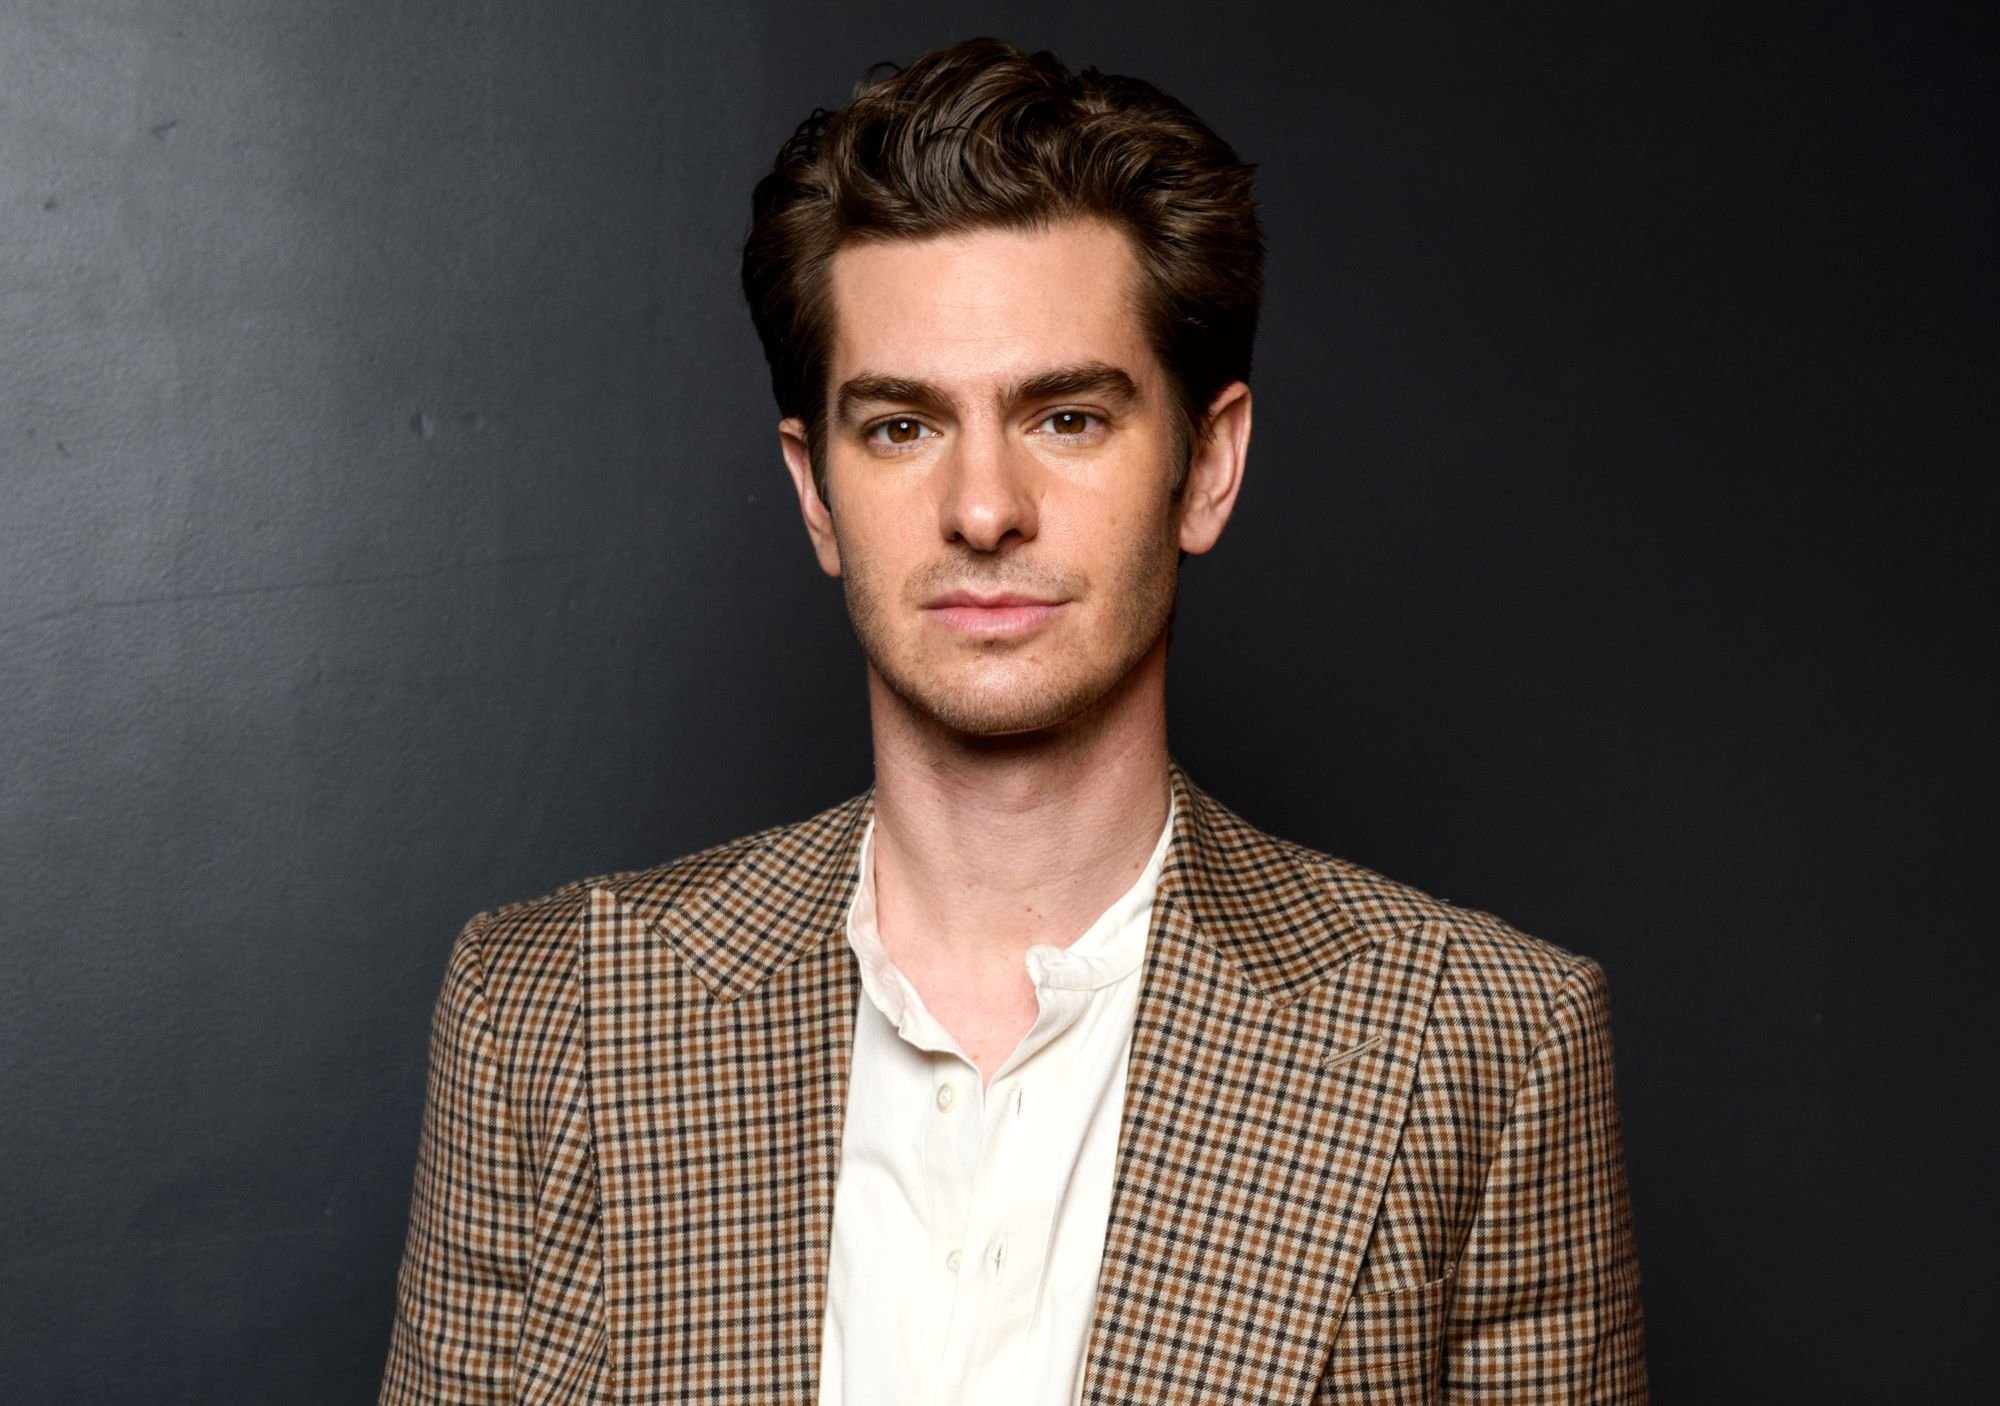 'Spider-Man: No Way Home' star Andrew Garfield wears a brown, black, and white plaid blazer over a white button-up shirt.